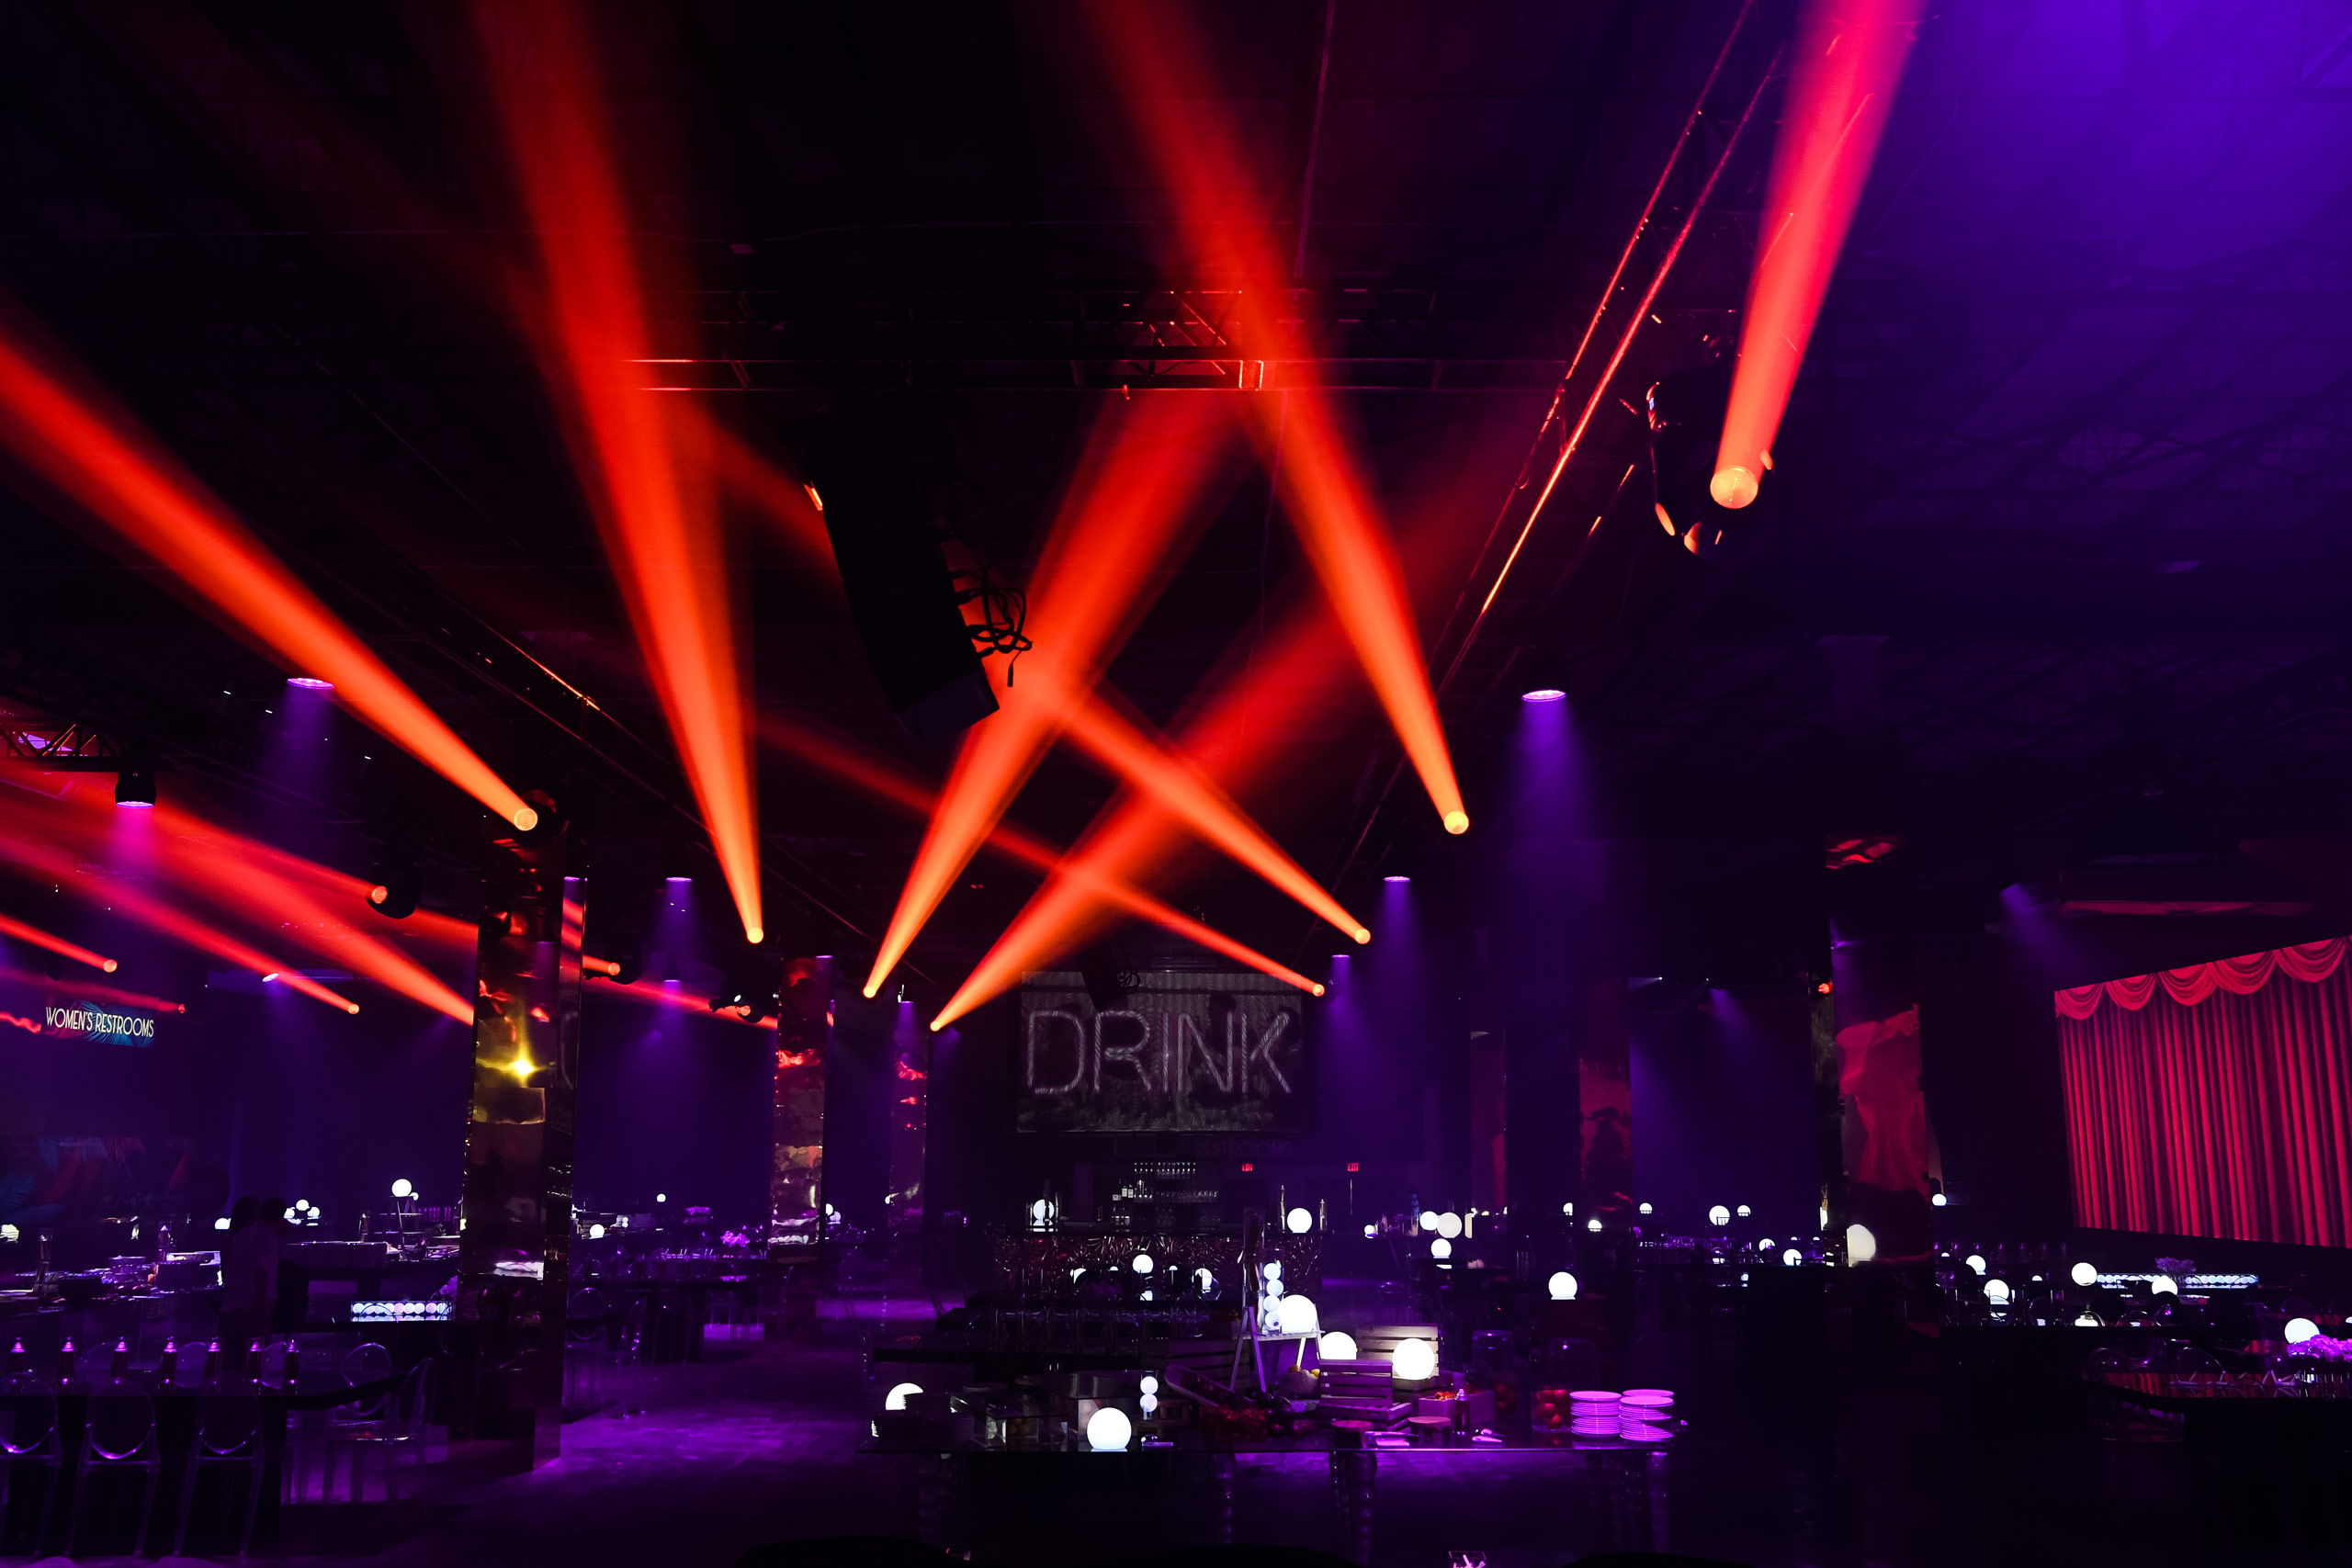 An elaborate lighting setup captured by an event photographer at a company reception